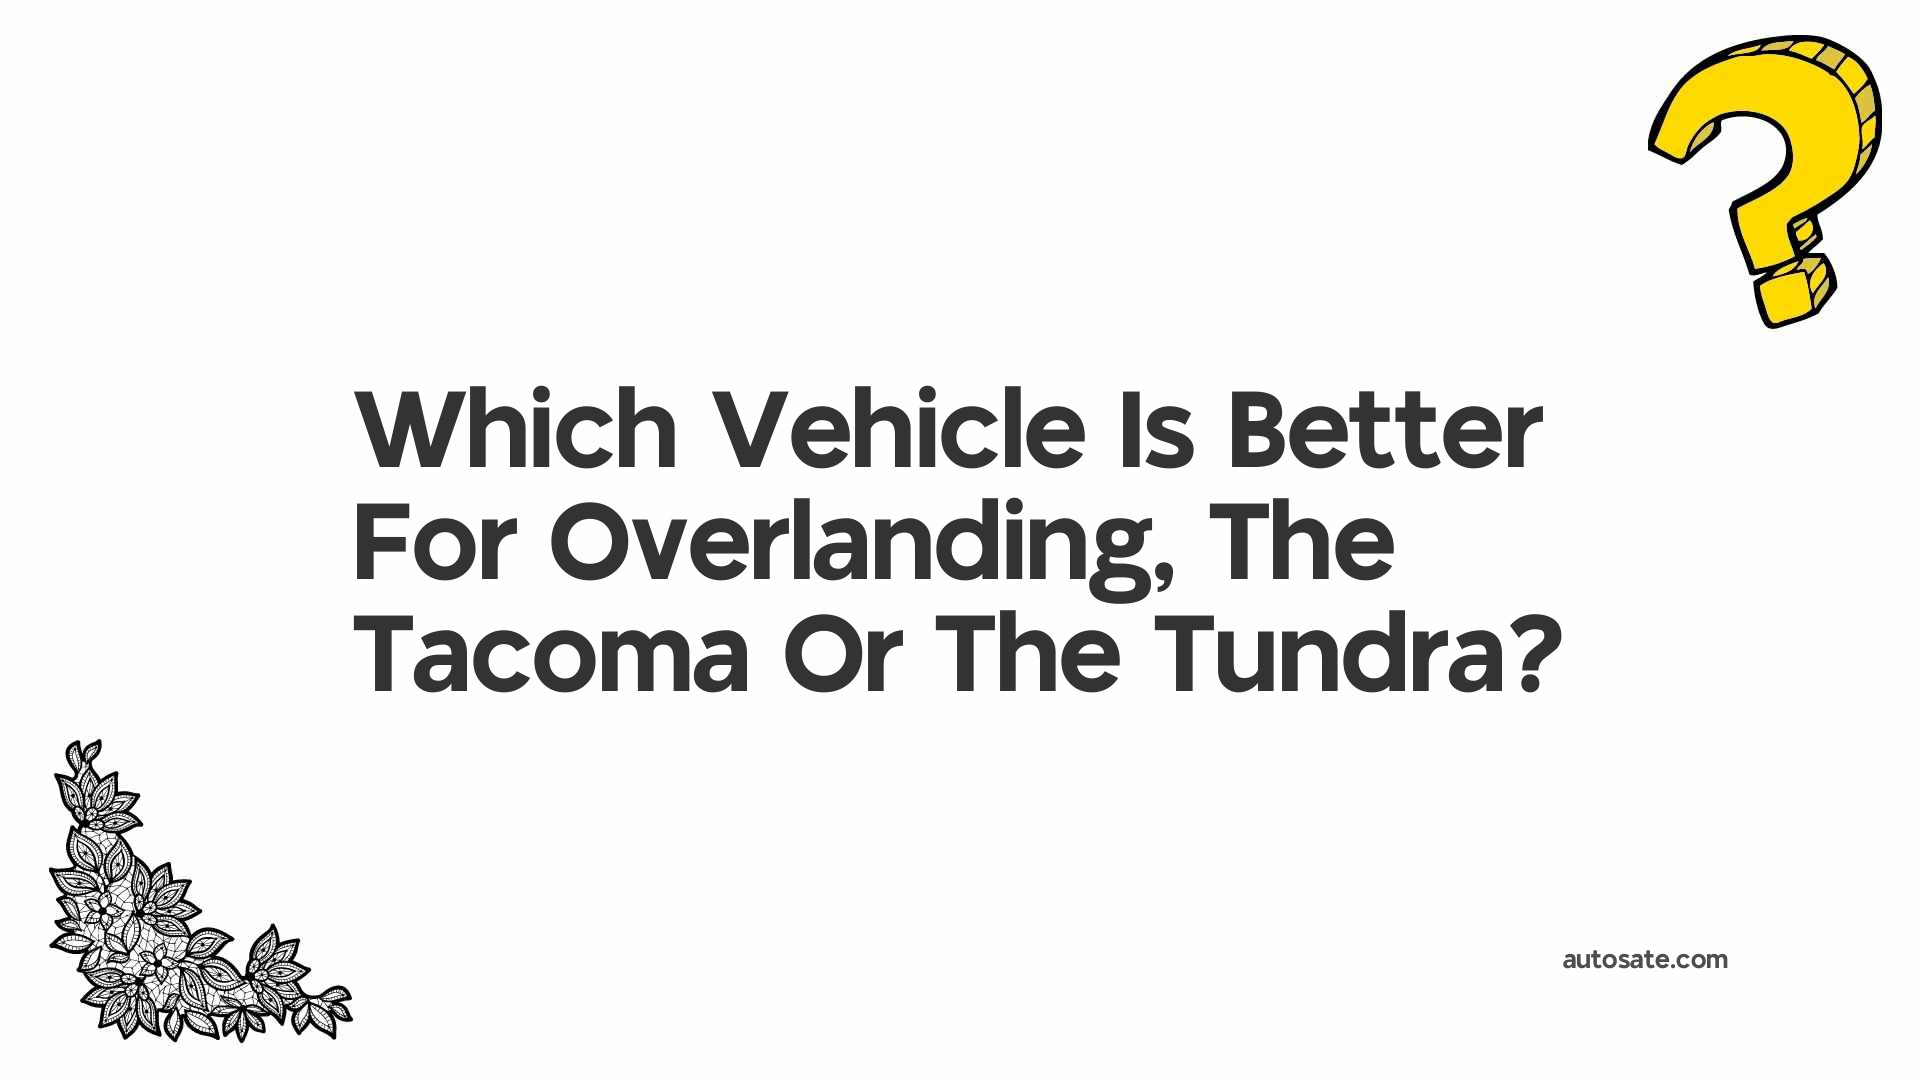 Which Vehicle Is Better For Overlanding, The Tacoma Or The Tundra?